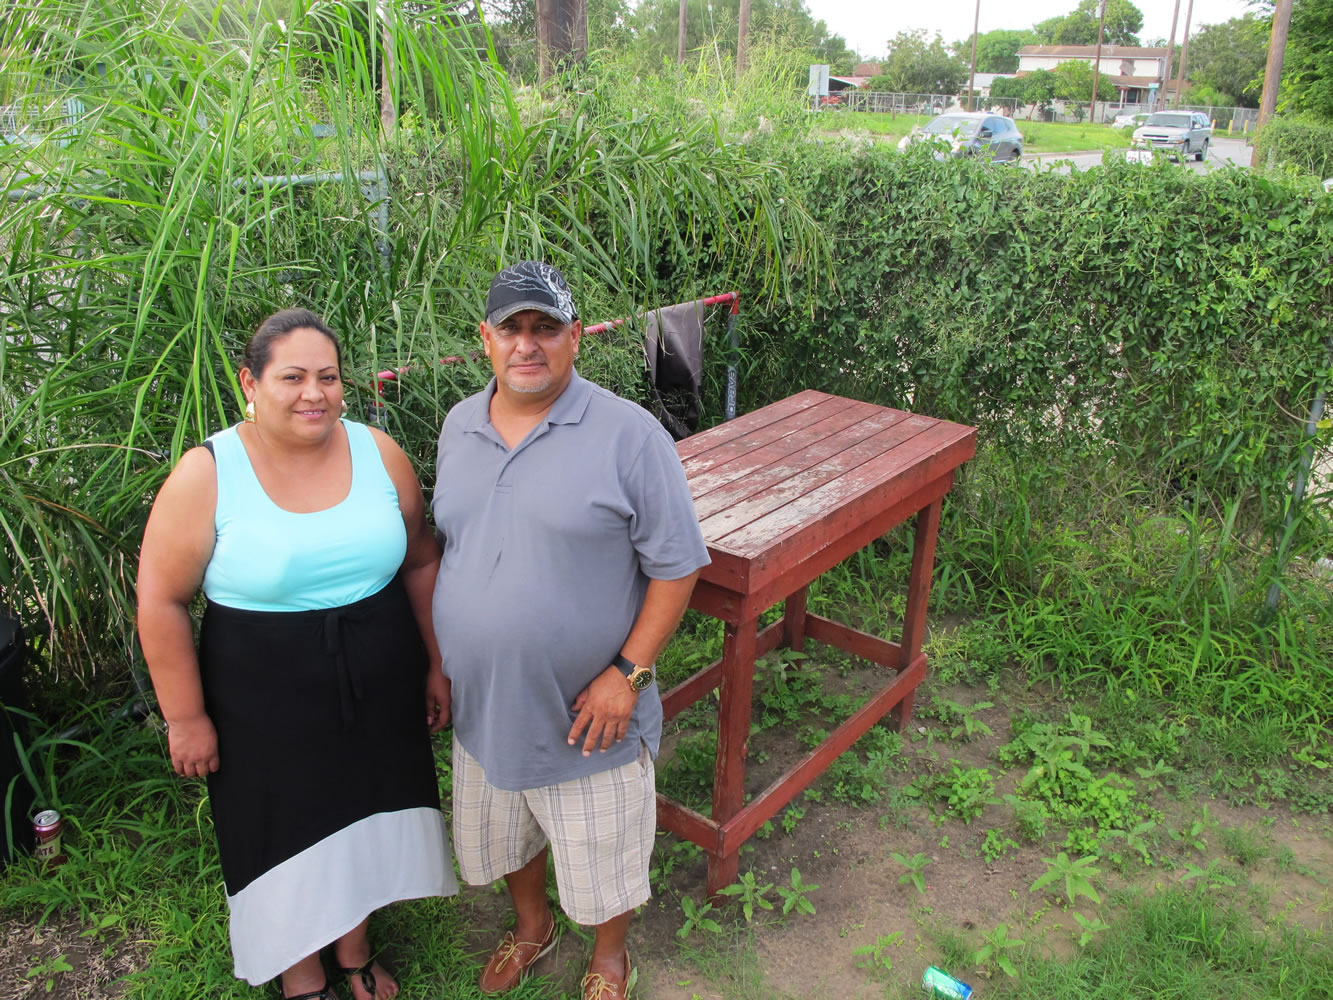 Sigifredo Saldana Iracheta, right, and his wife, Laura Saldana, pose for a photo outside his sister's home in Brownsville, Texas.